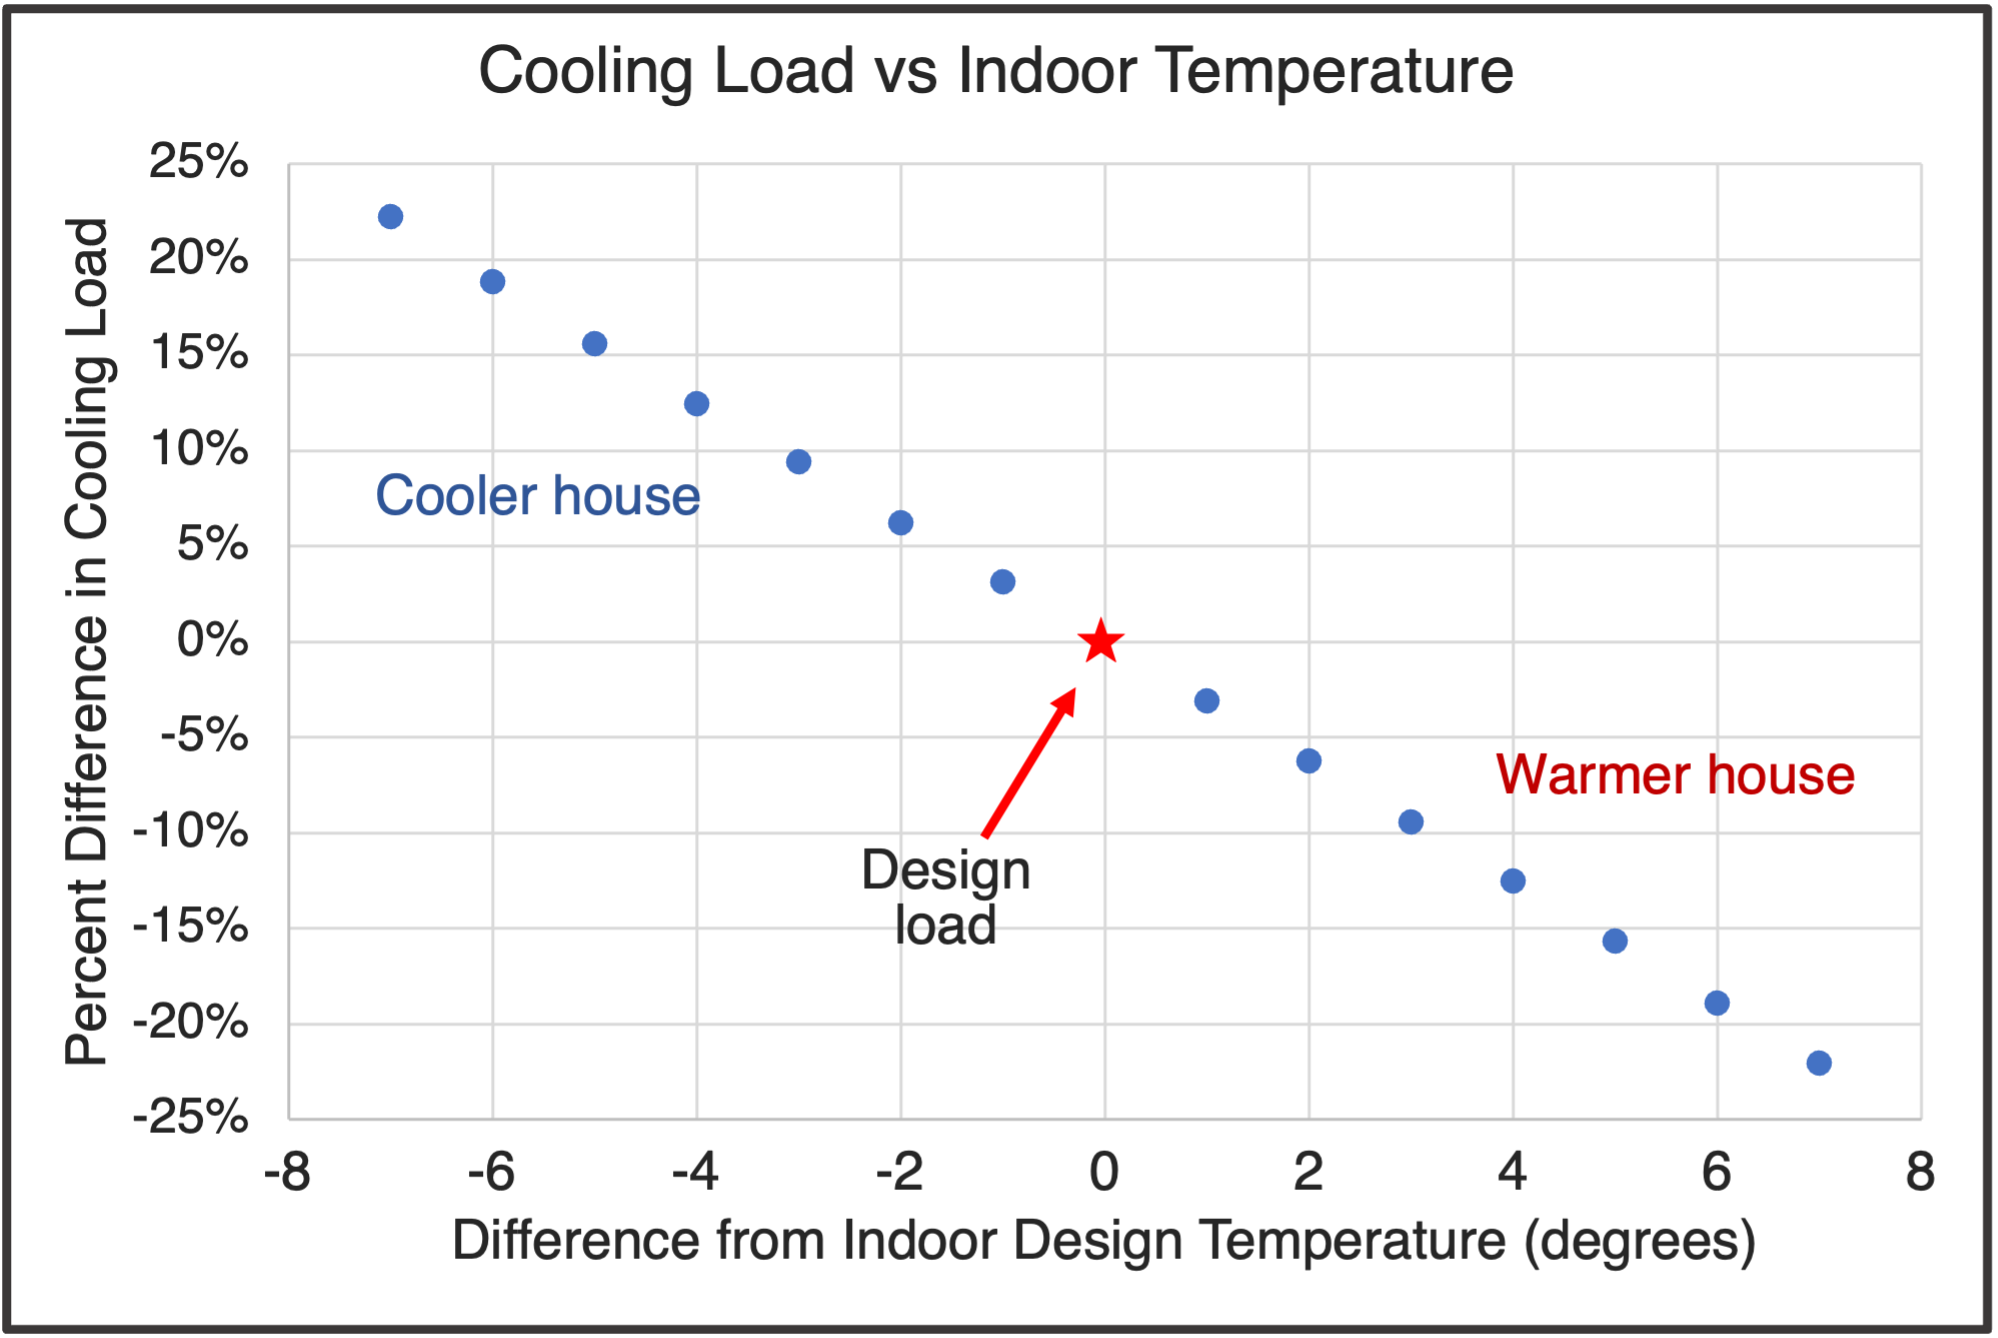 Cooling load variation with changing indoor temperature